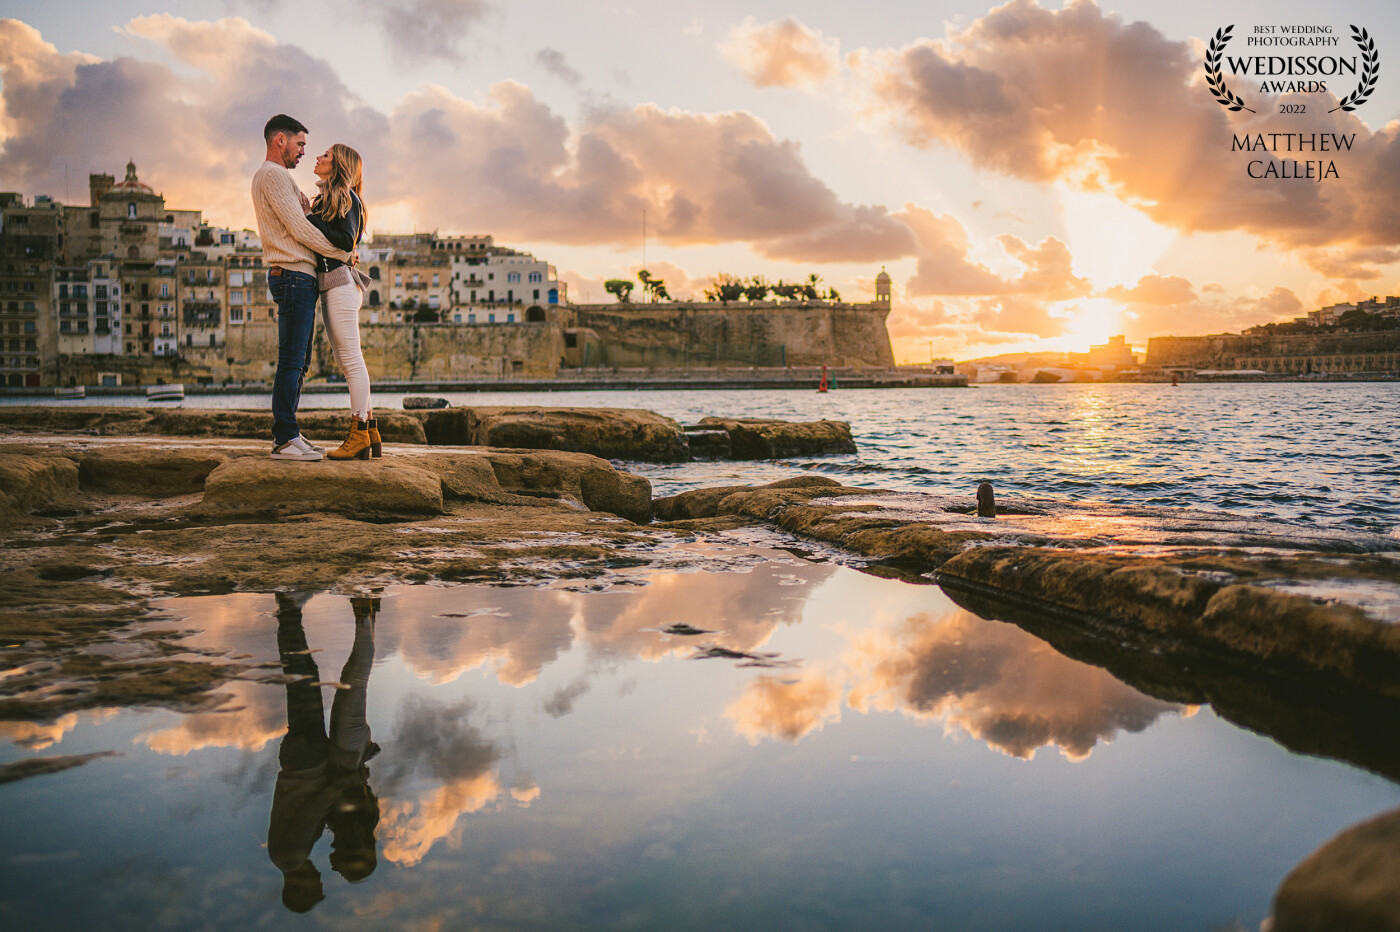 After a whole week of constant rain, we were lucky enough to have a great sunset during the pre-wedding, which is usually the case in Malta. The rain from previous days played in our favour creating the reflection which makes this image really pop out!